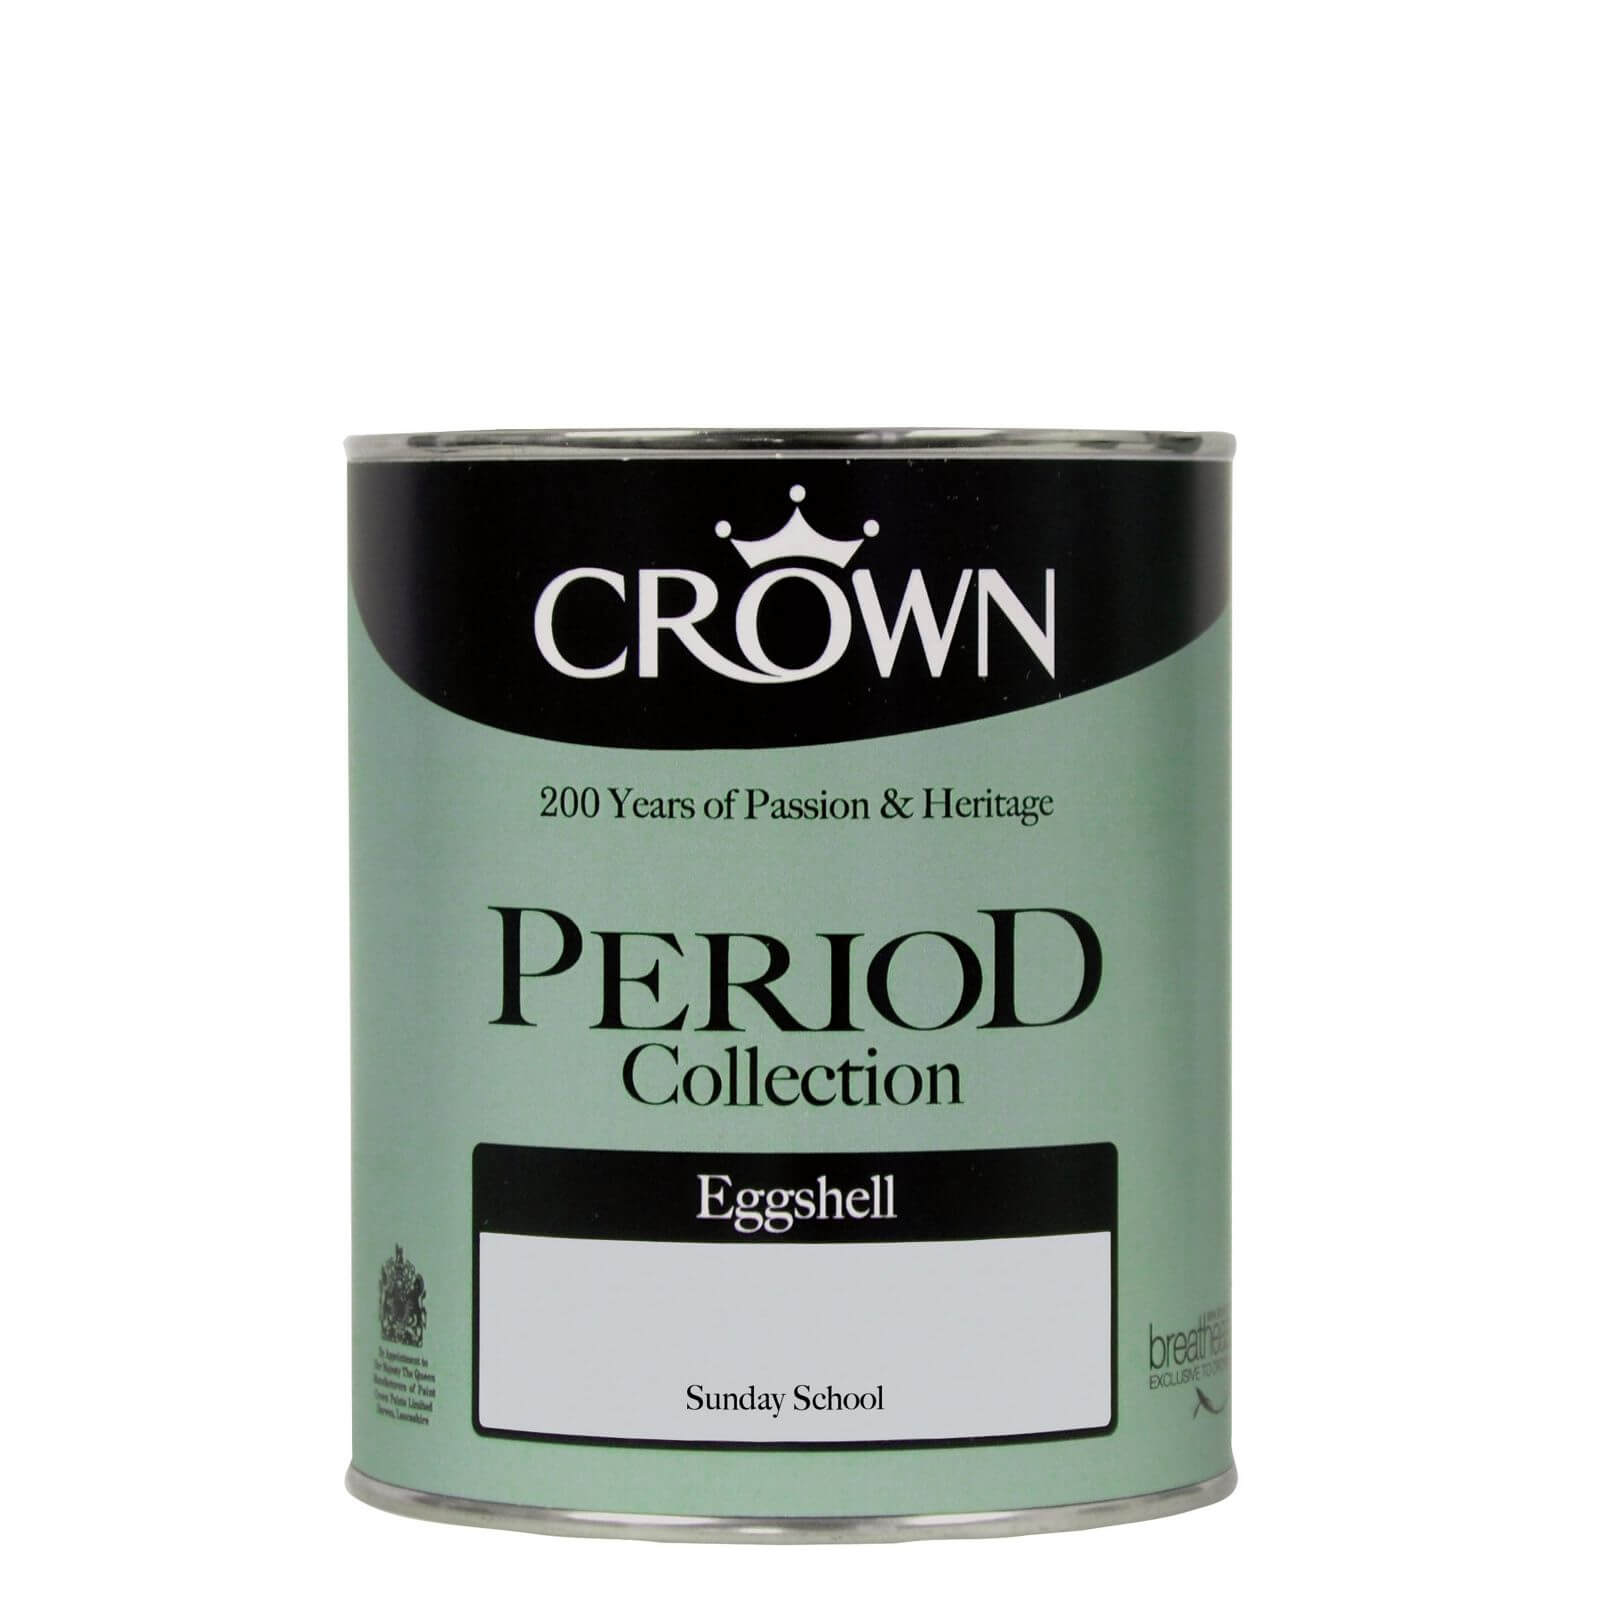 Crown Period Collection Sunday School - Eggshell Paint - 750ml